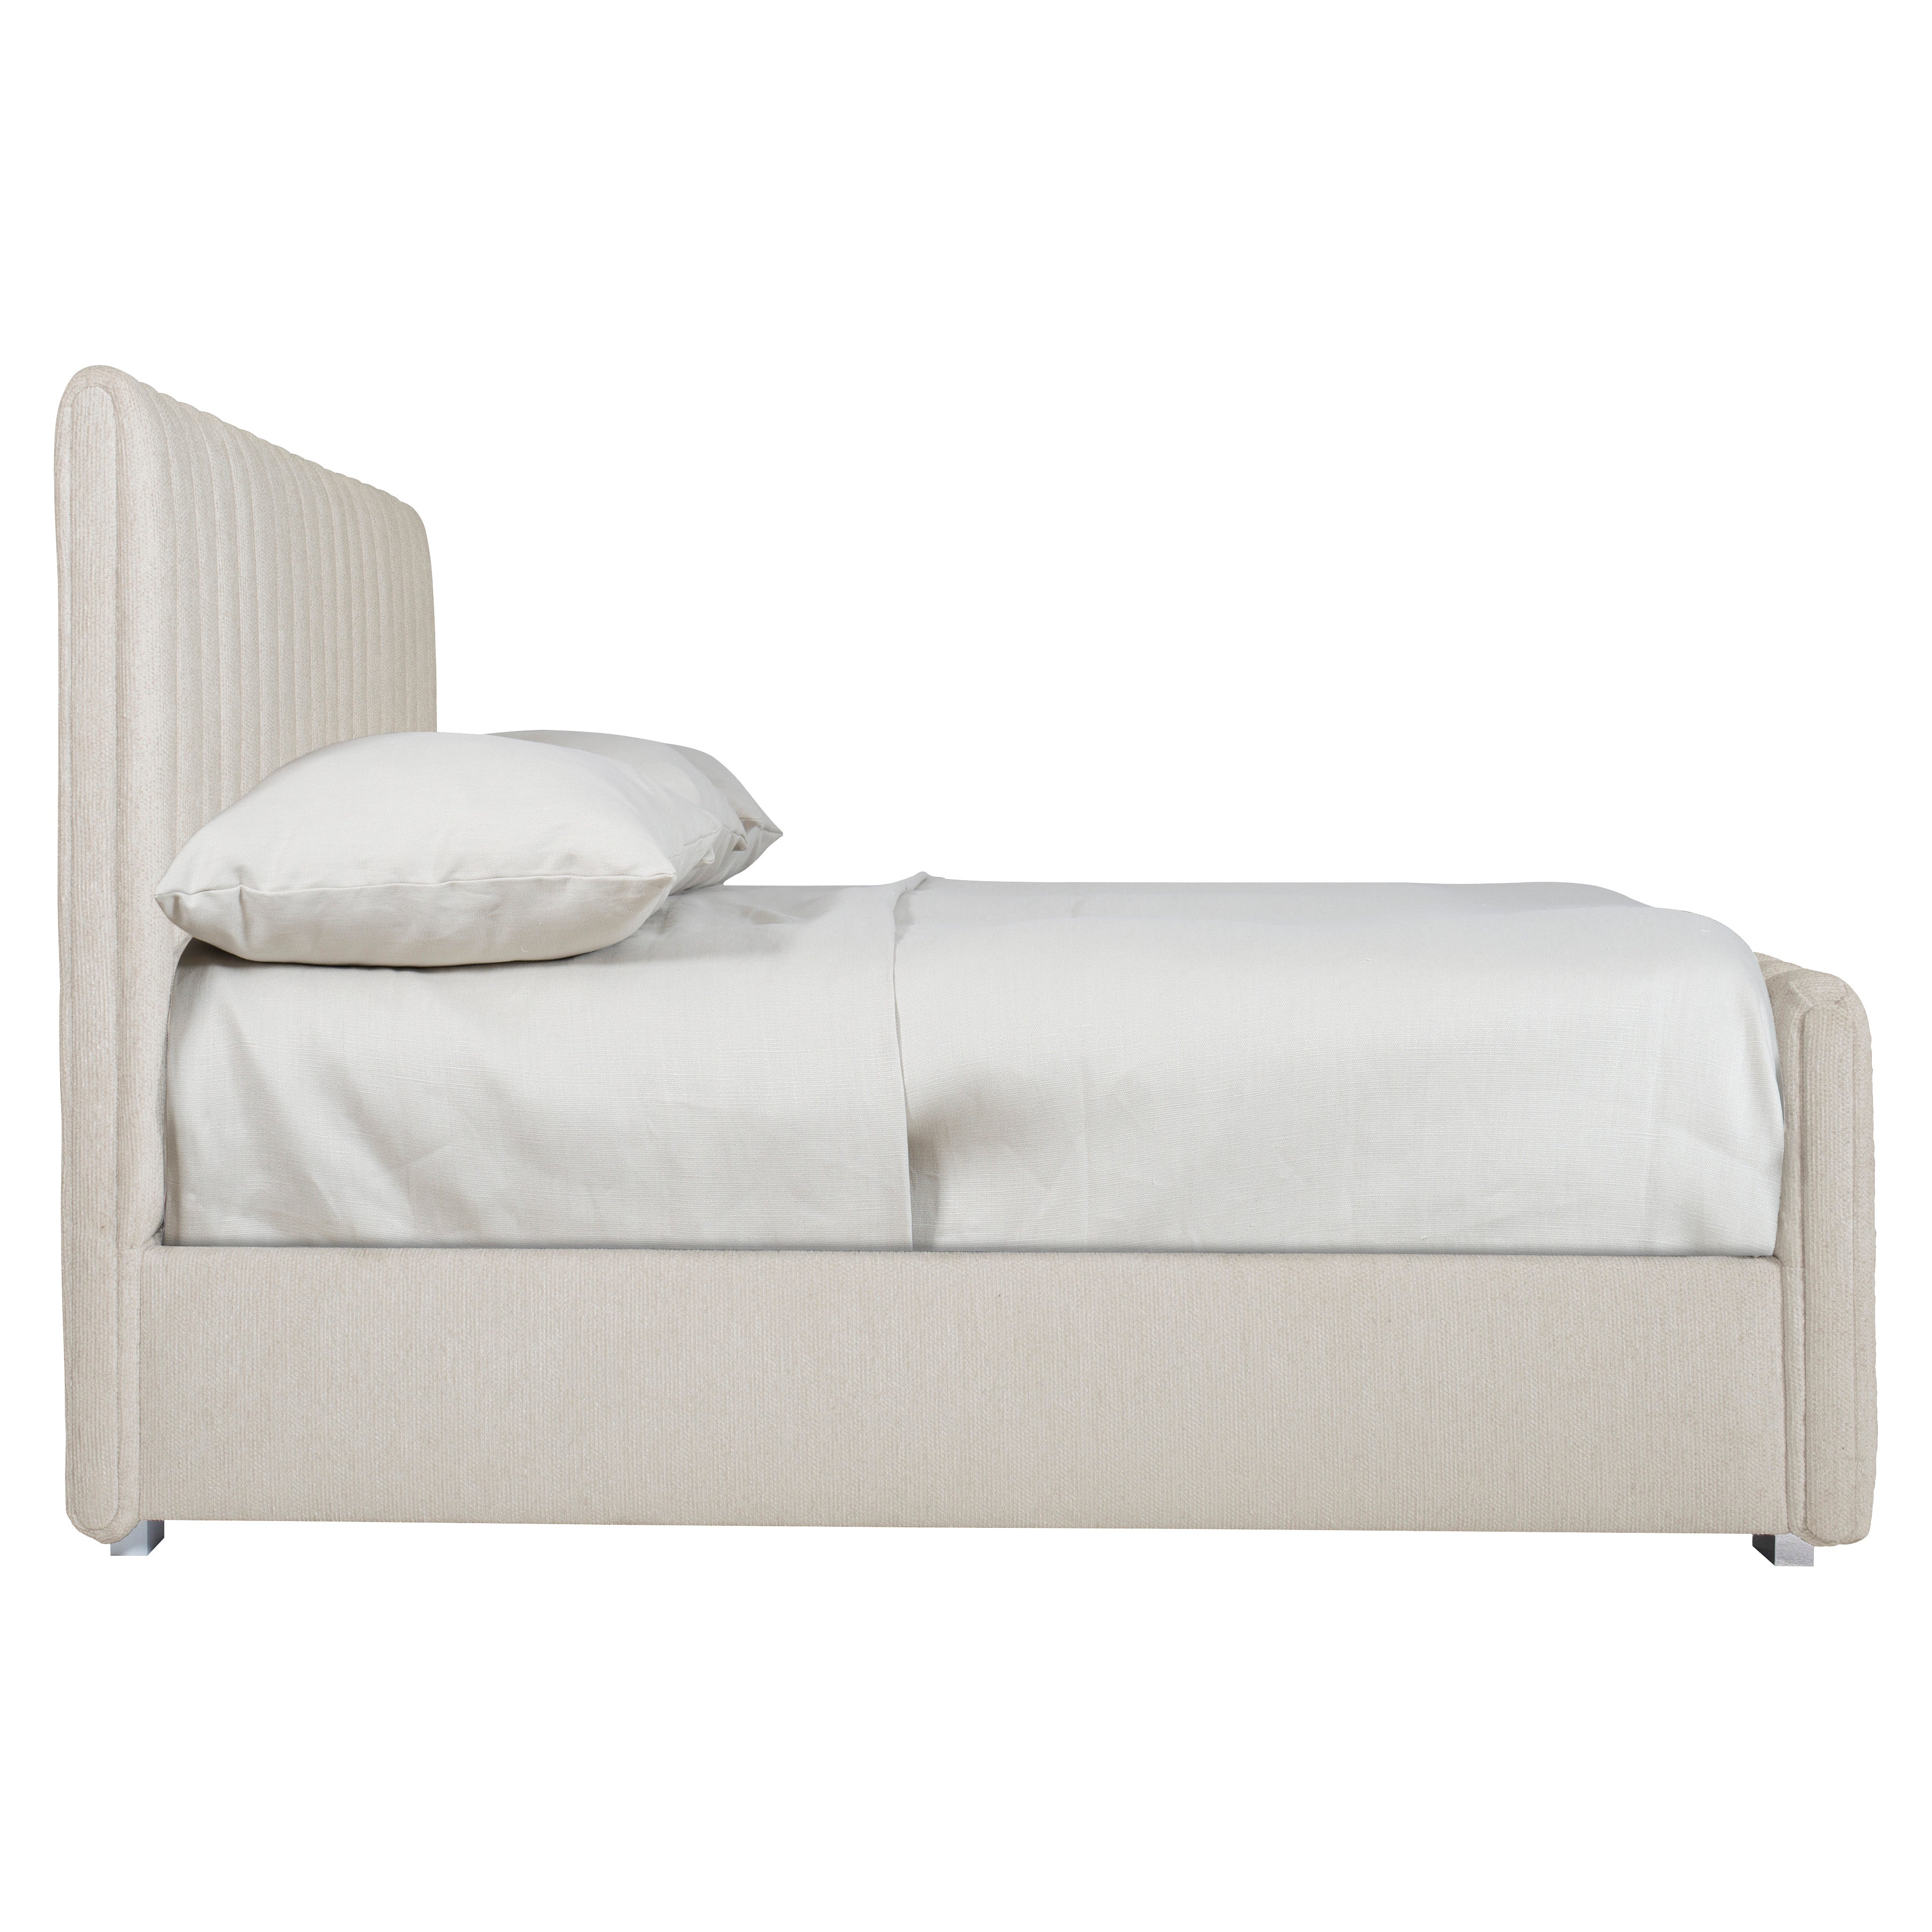 Silhouette Channel Upholstered King Panel Bed